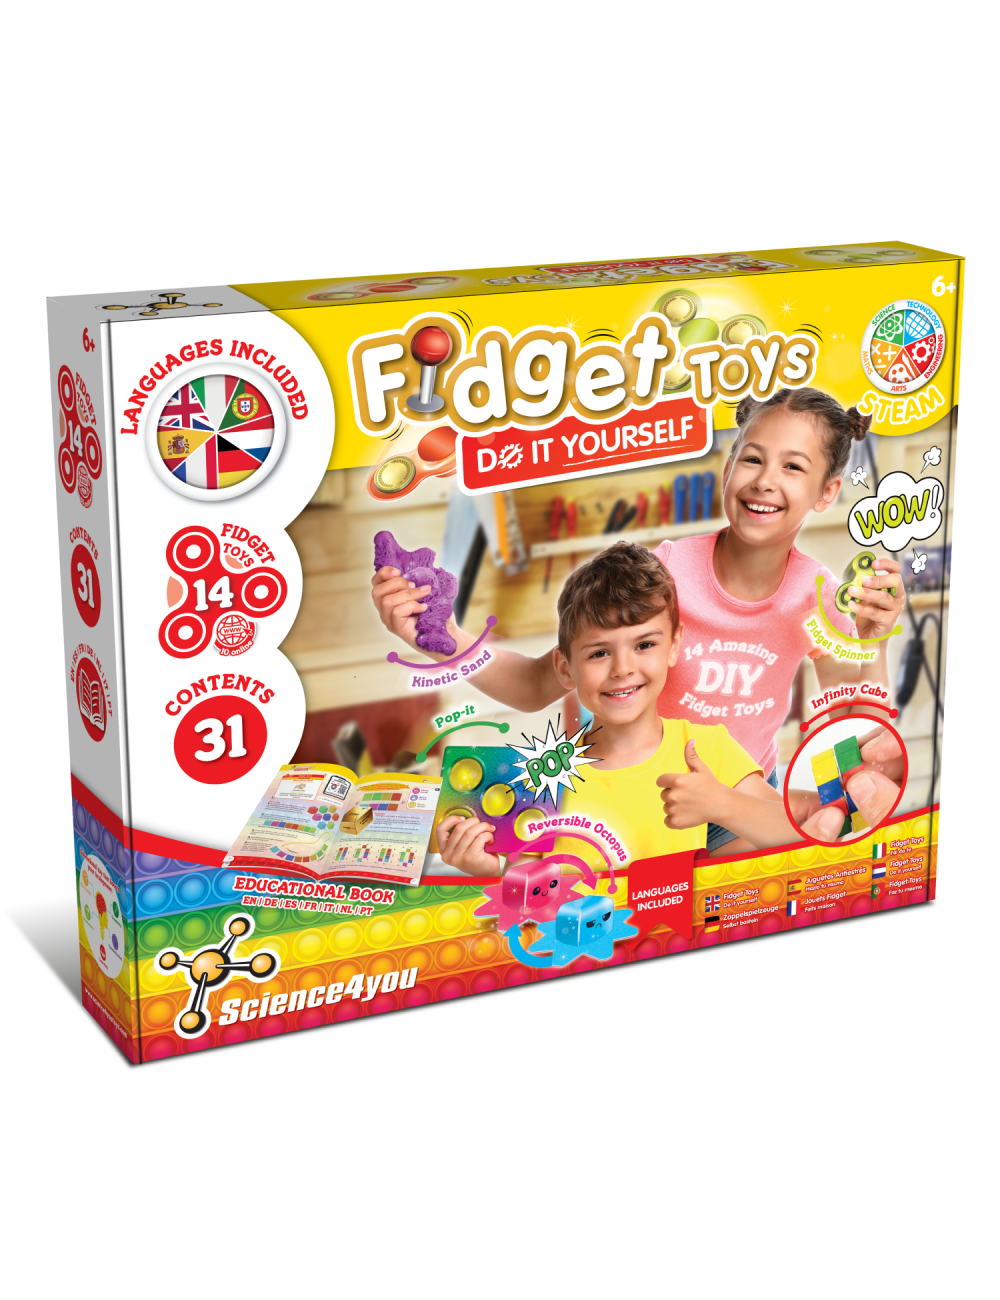 Fidget Toys - Do it yourself, Multilingual, Educational and Scientific  Toys for Children +6 years old